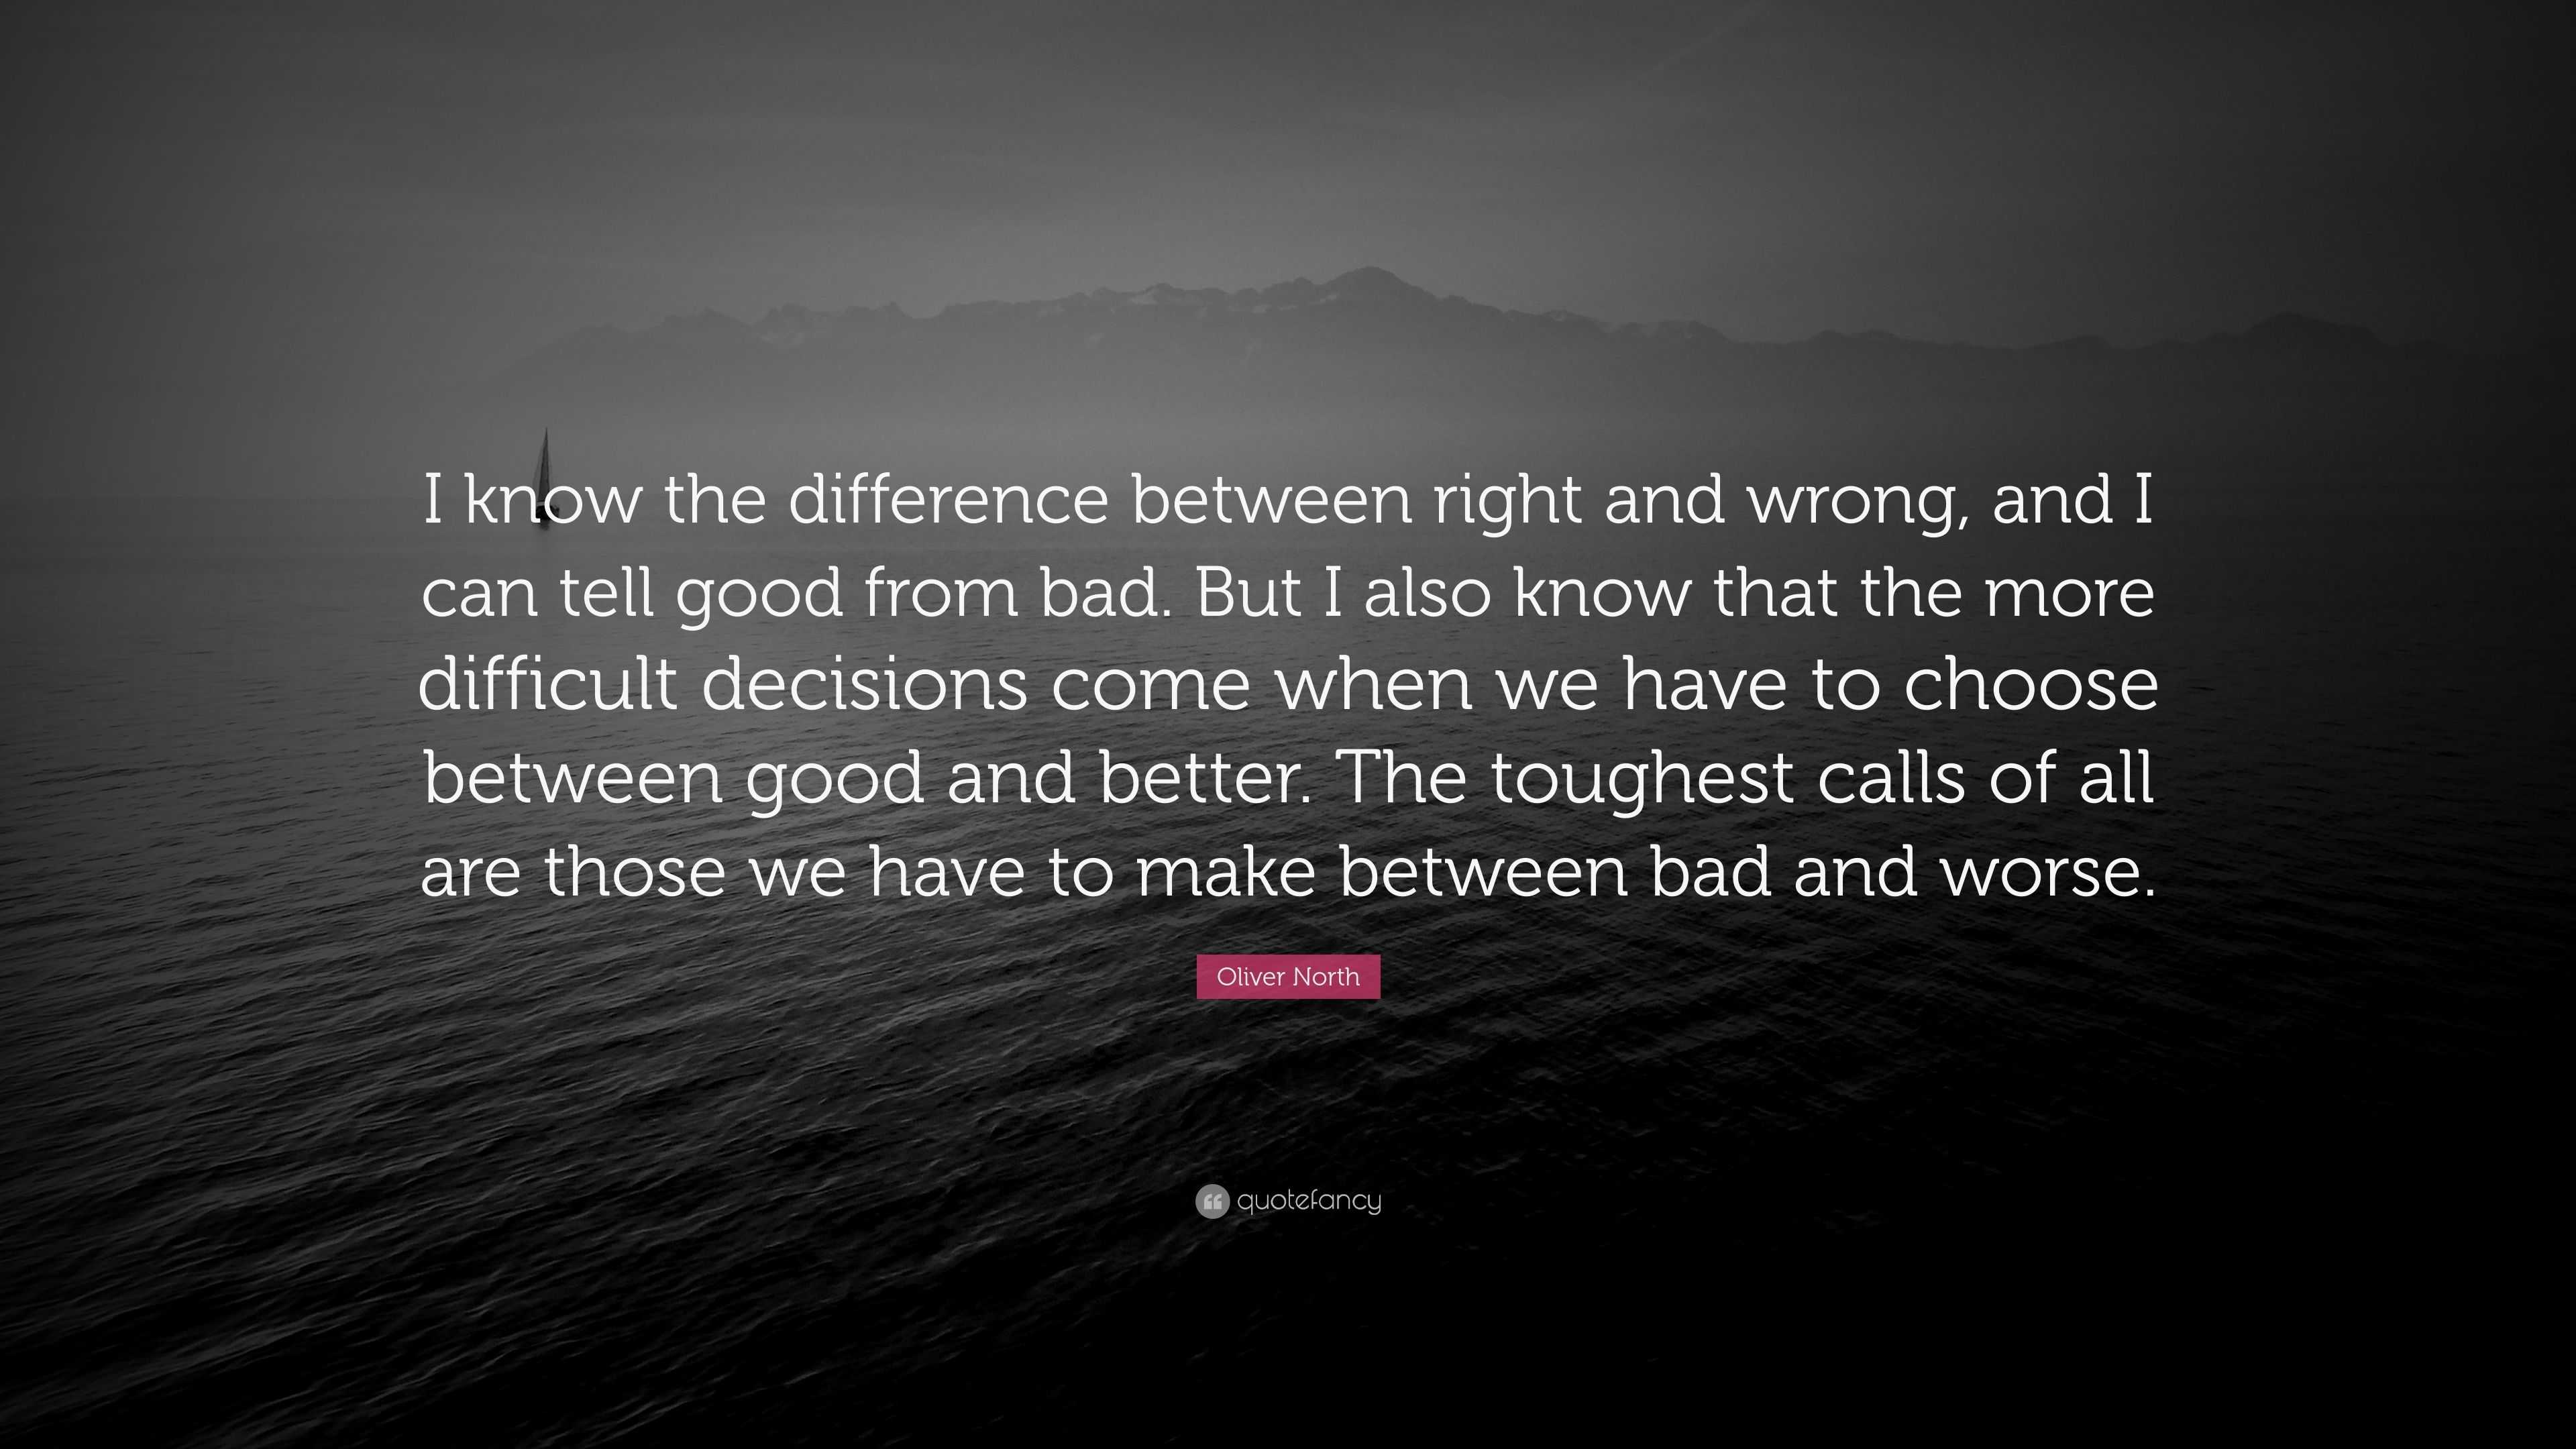 THE DIFFERENCE BETWEEN RIGHT AND WRONG